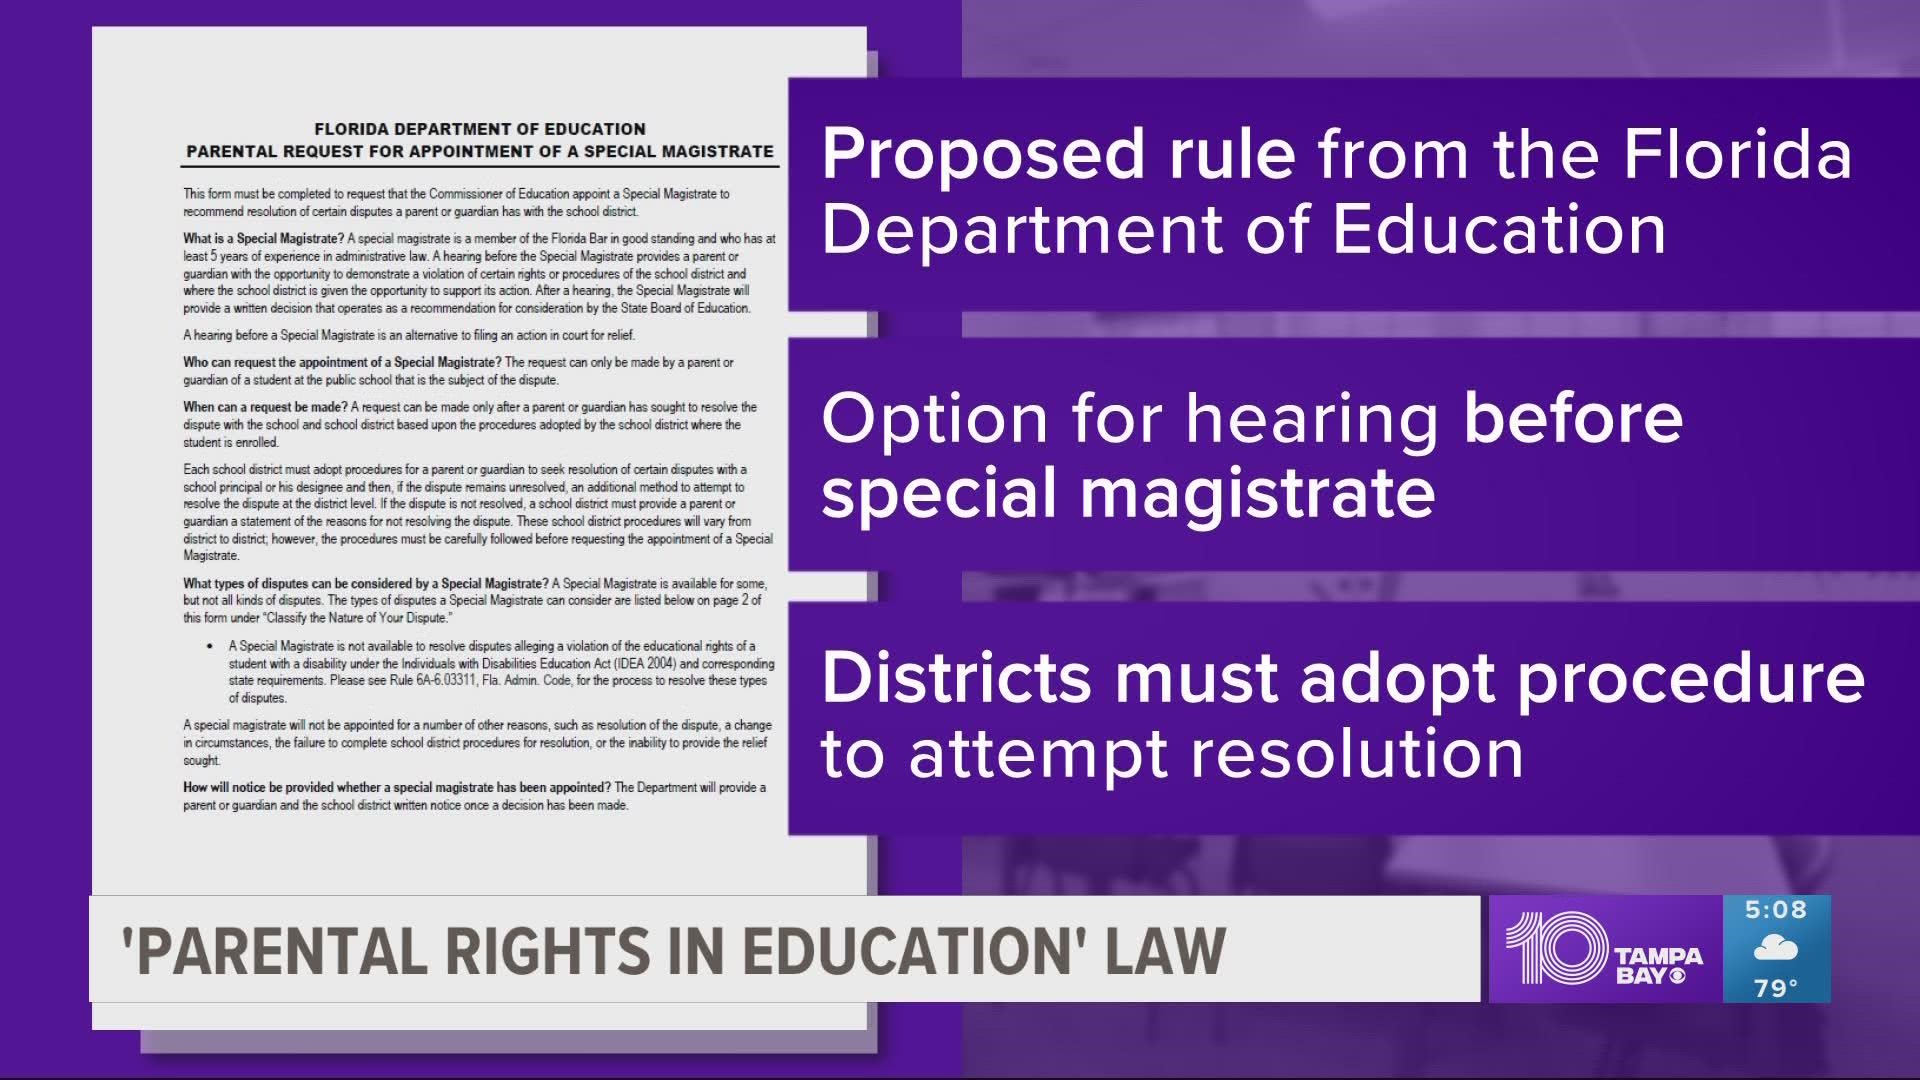 The Florida Department of Education published a proposal for how to carry out the complaint process under the controversial "Parental Rights in Education" law.